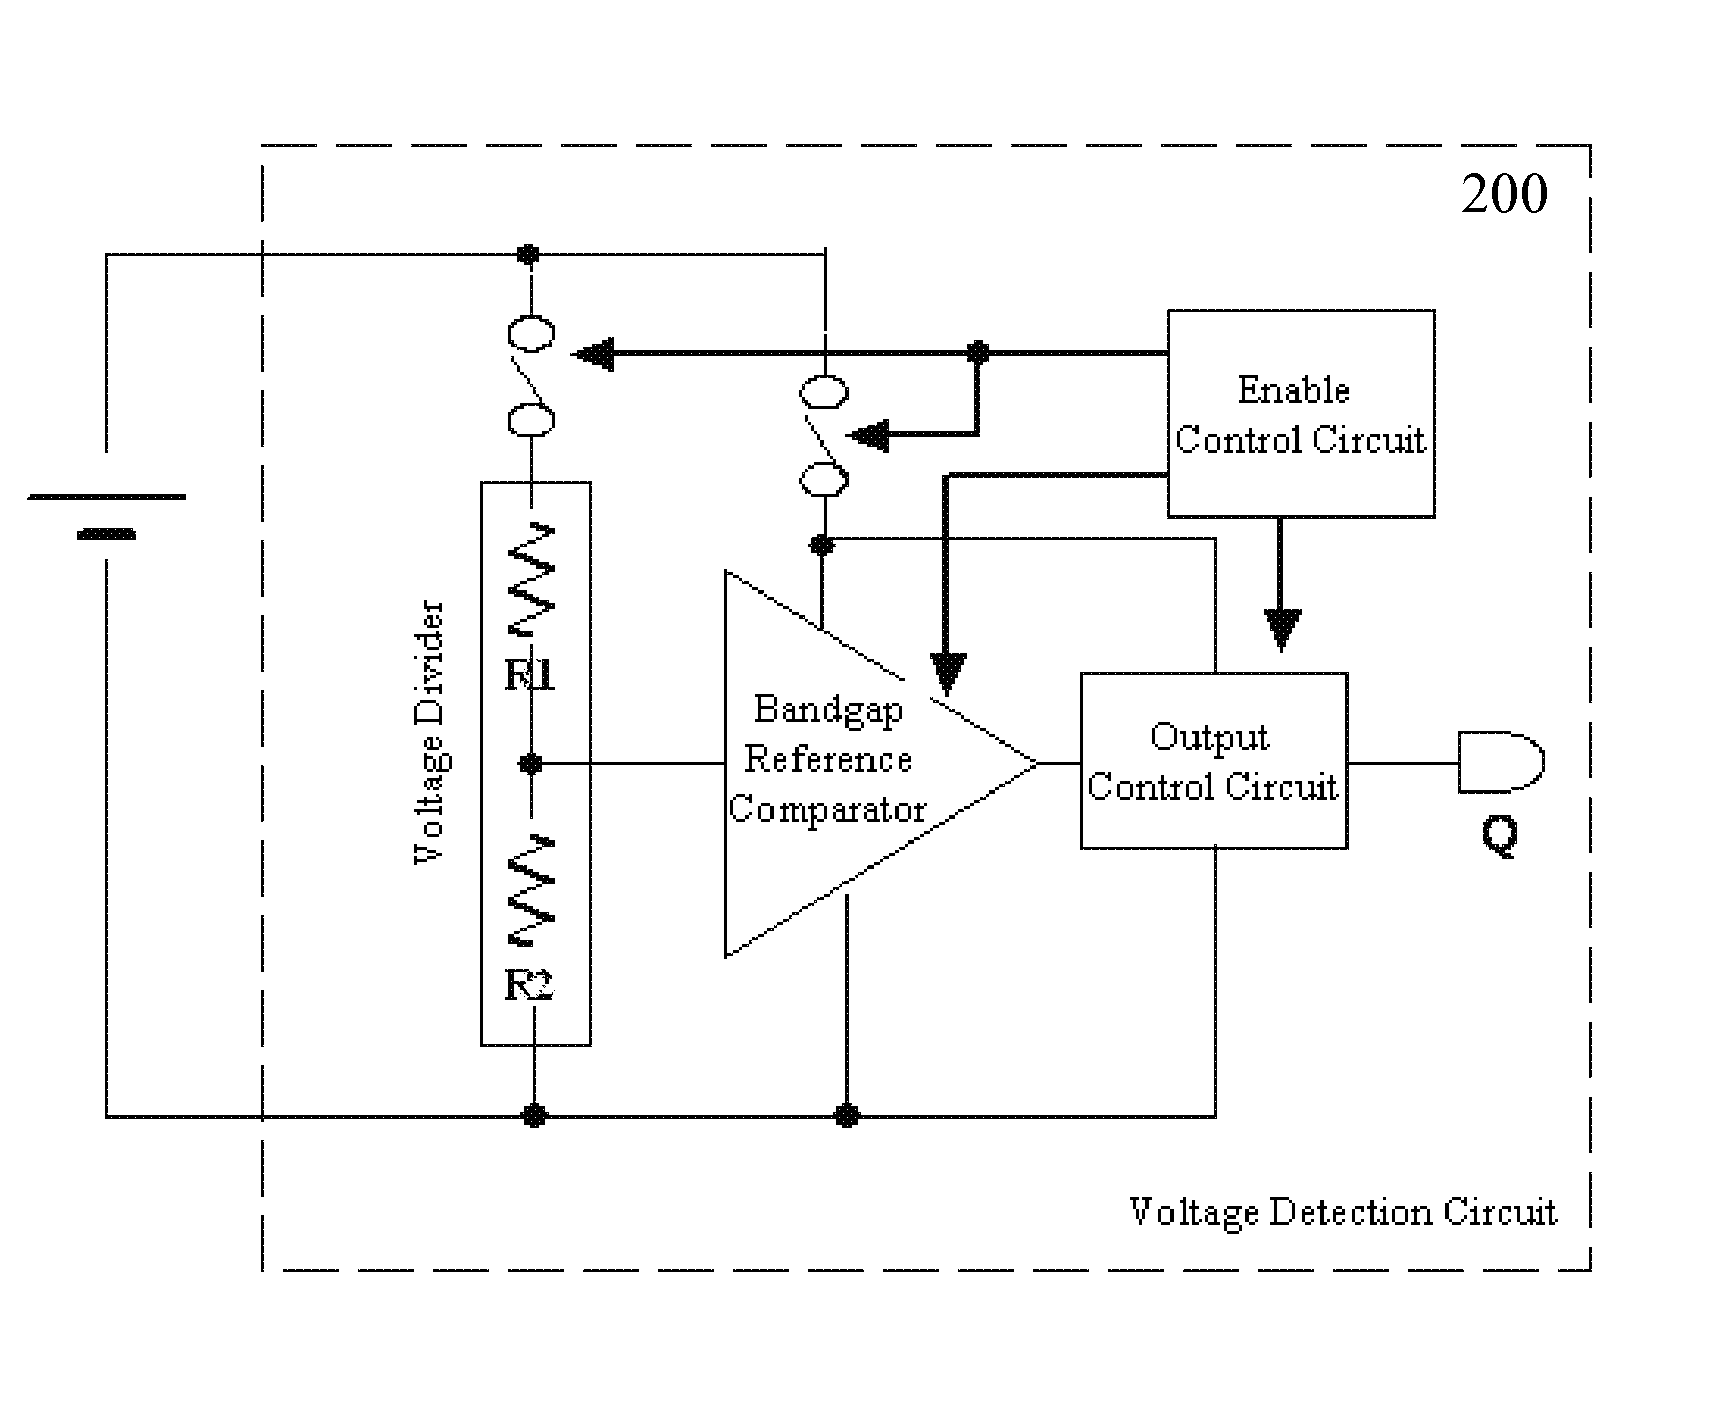 Accurate scan-mode voltage detection circuit